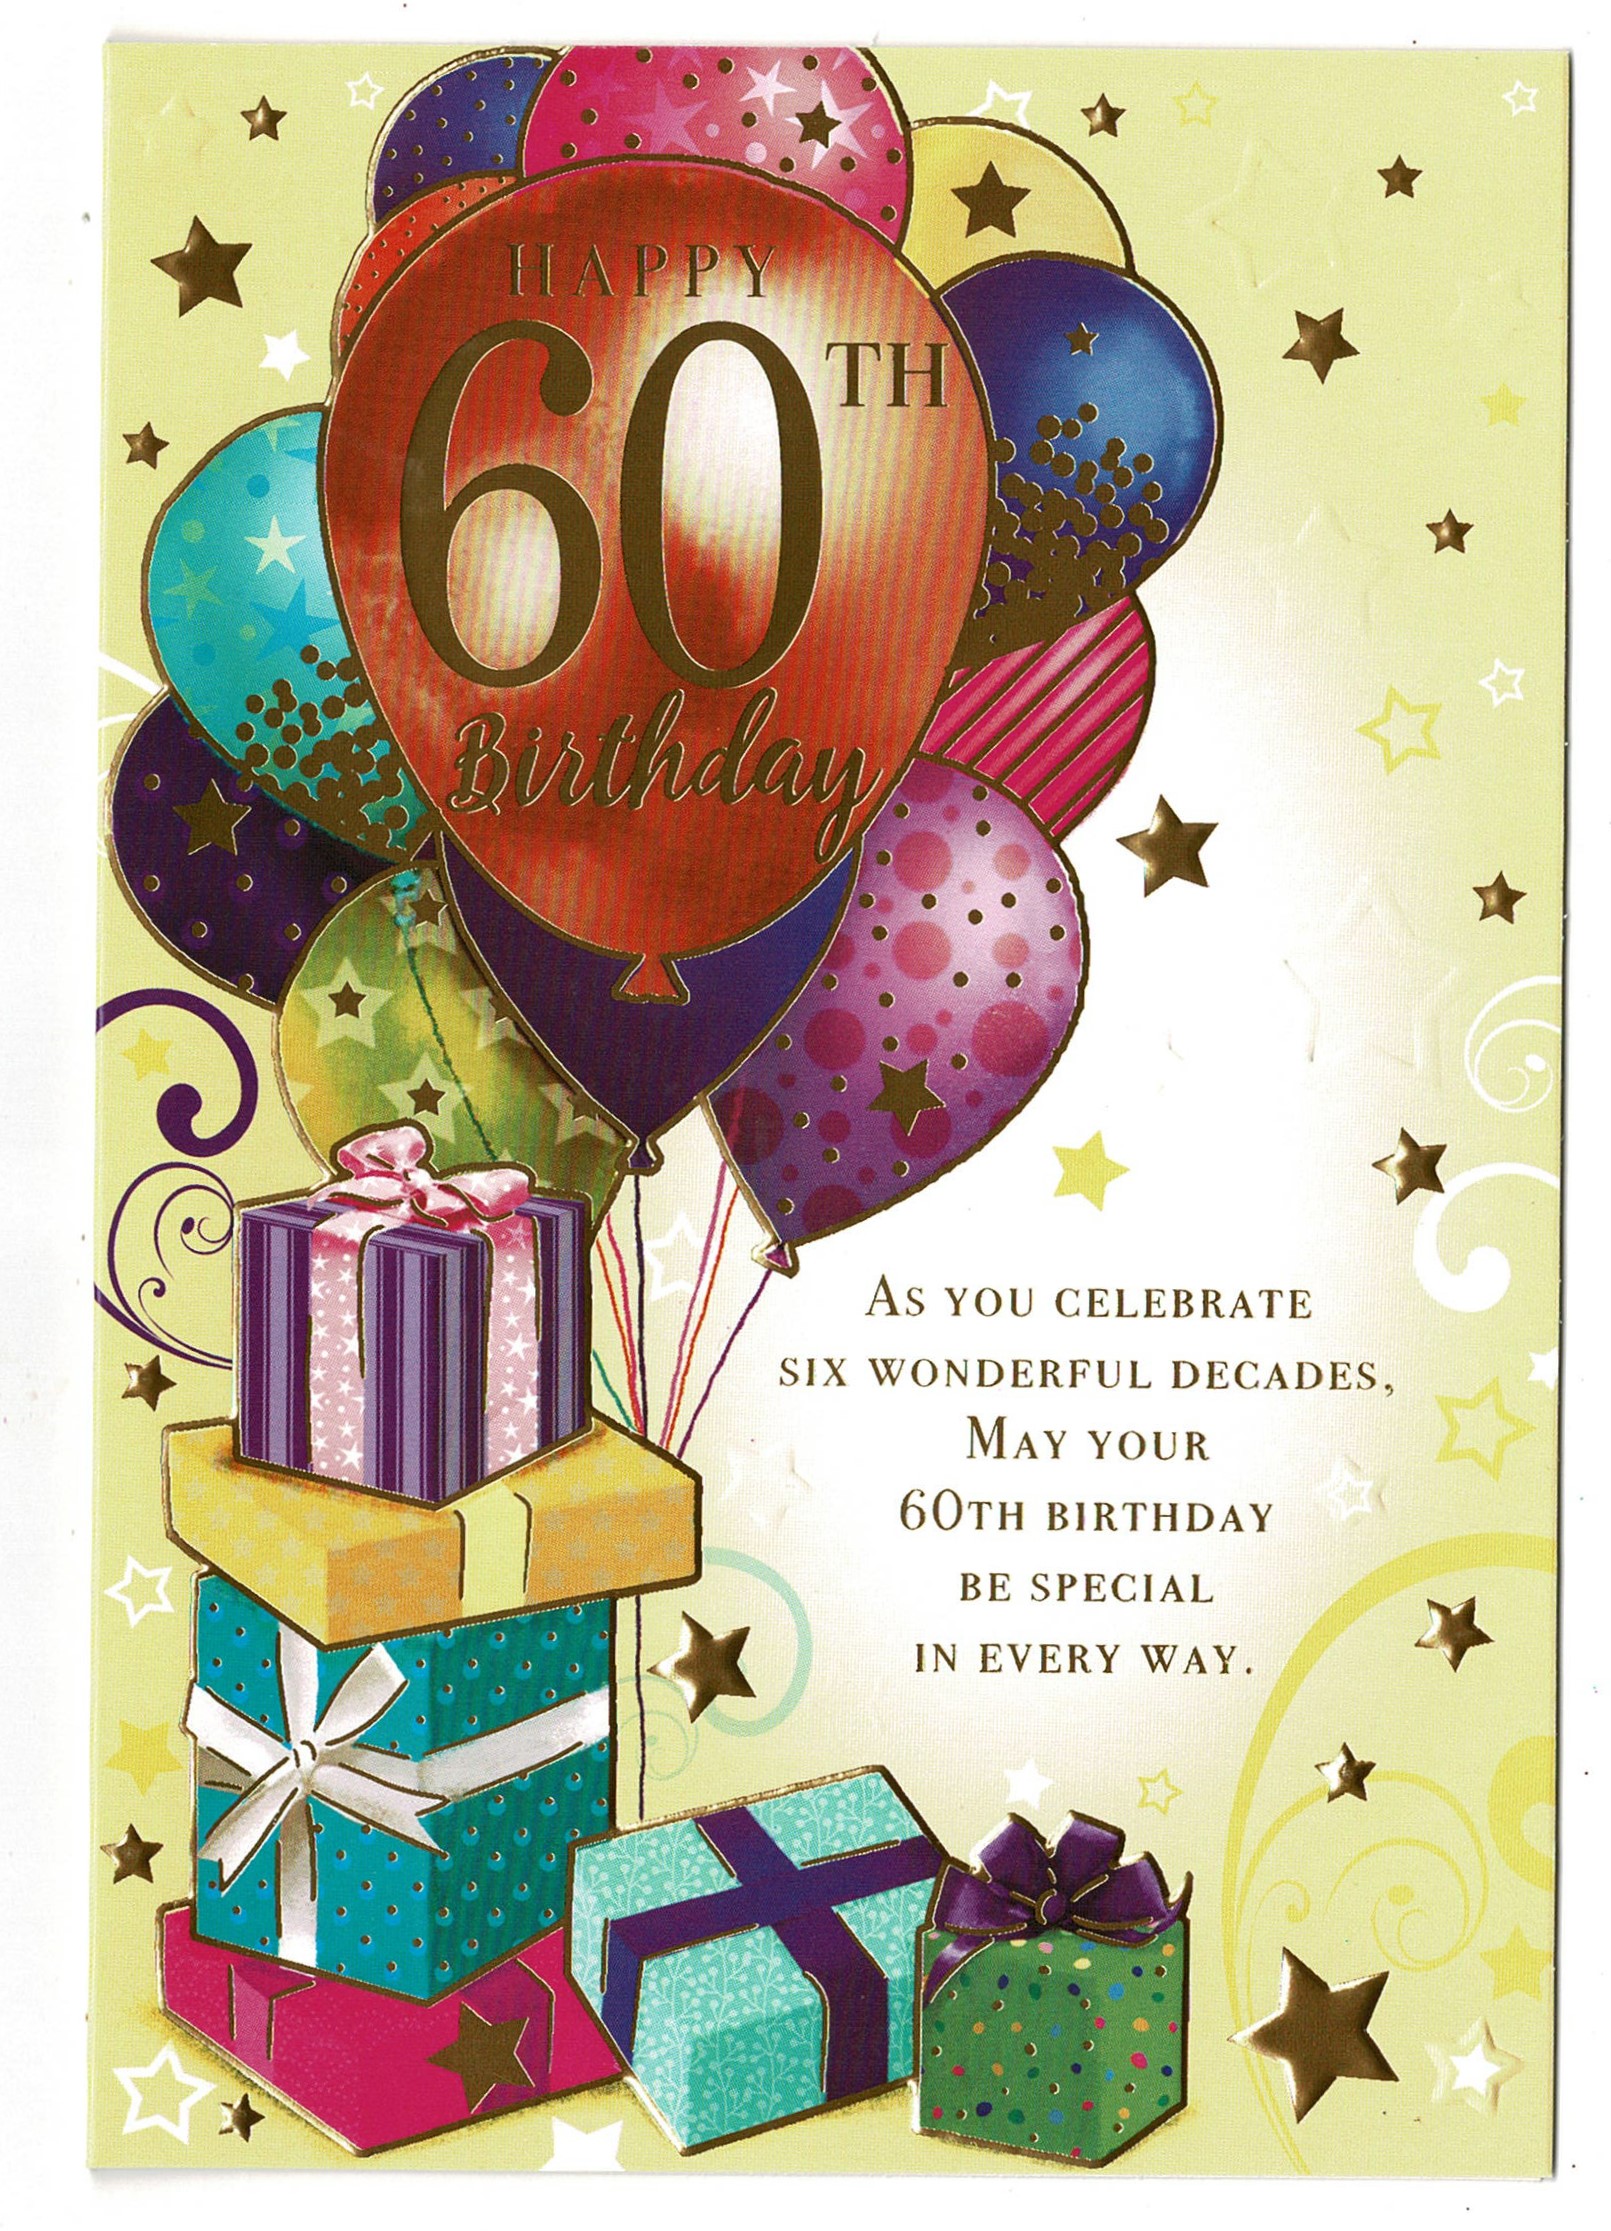 60th Birthday Card ' Happy 60th Birthday' With Balloon Design - With ...